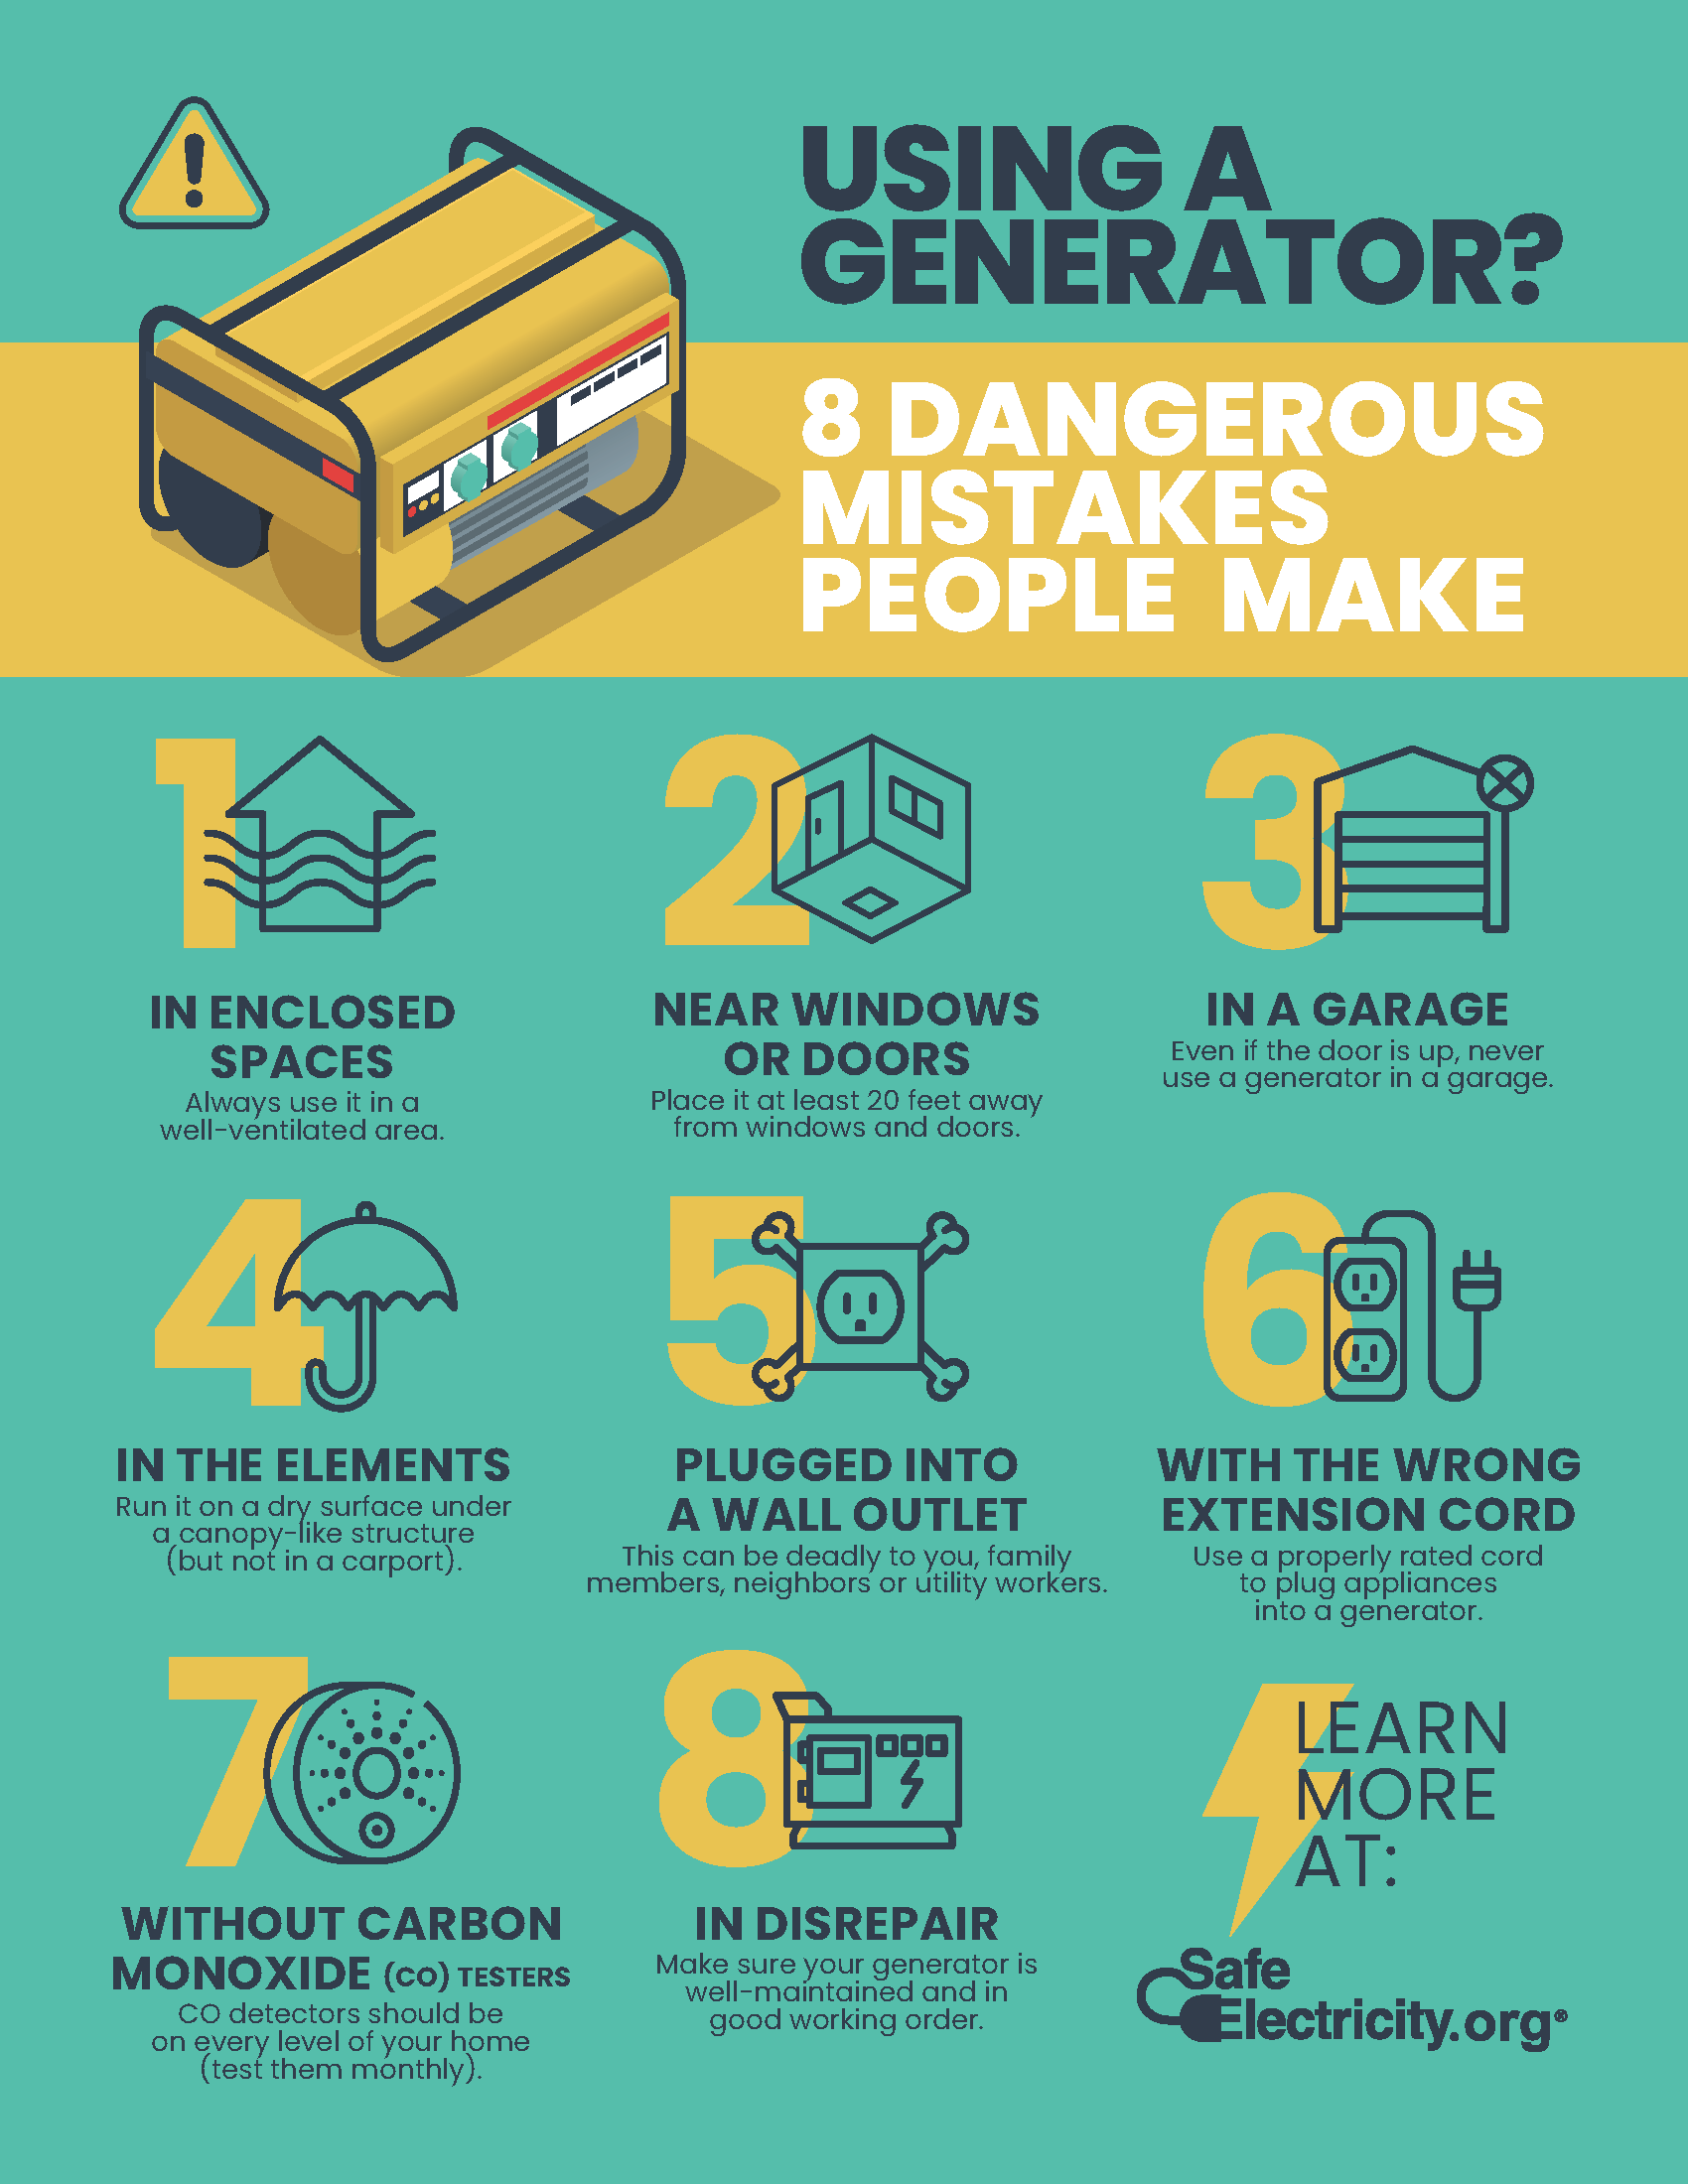 An infographic about 8 dangerous mistakes people make when using a generator.  Never use a generator indoors or in any enclosed space or near the doors or windows of your home. Always use carbon monoxide detectors on every level of your home and test them monthly. 